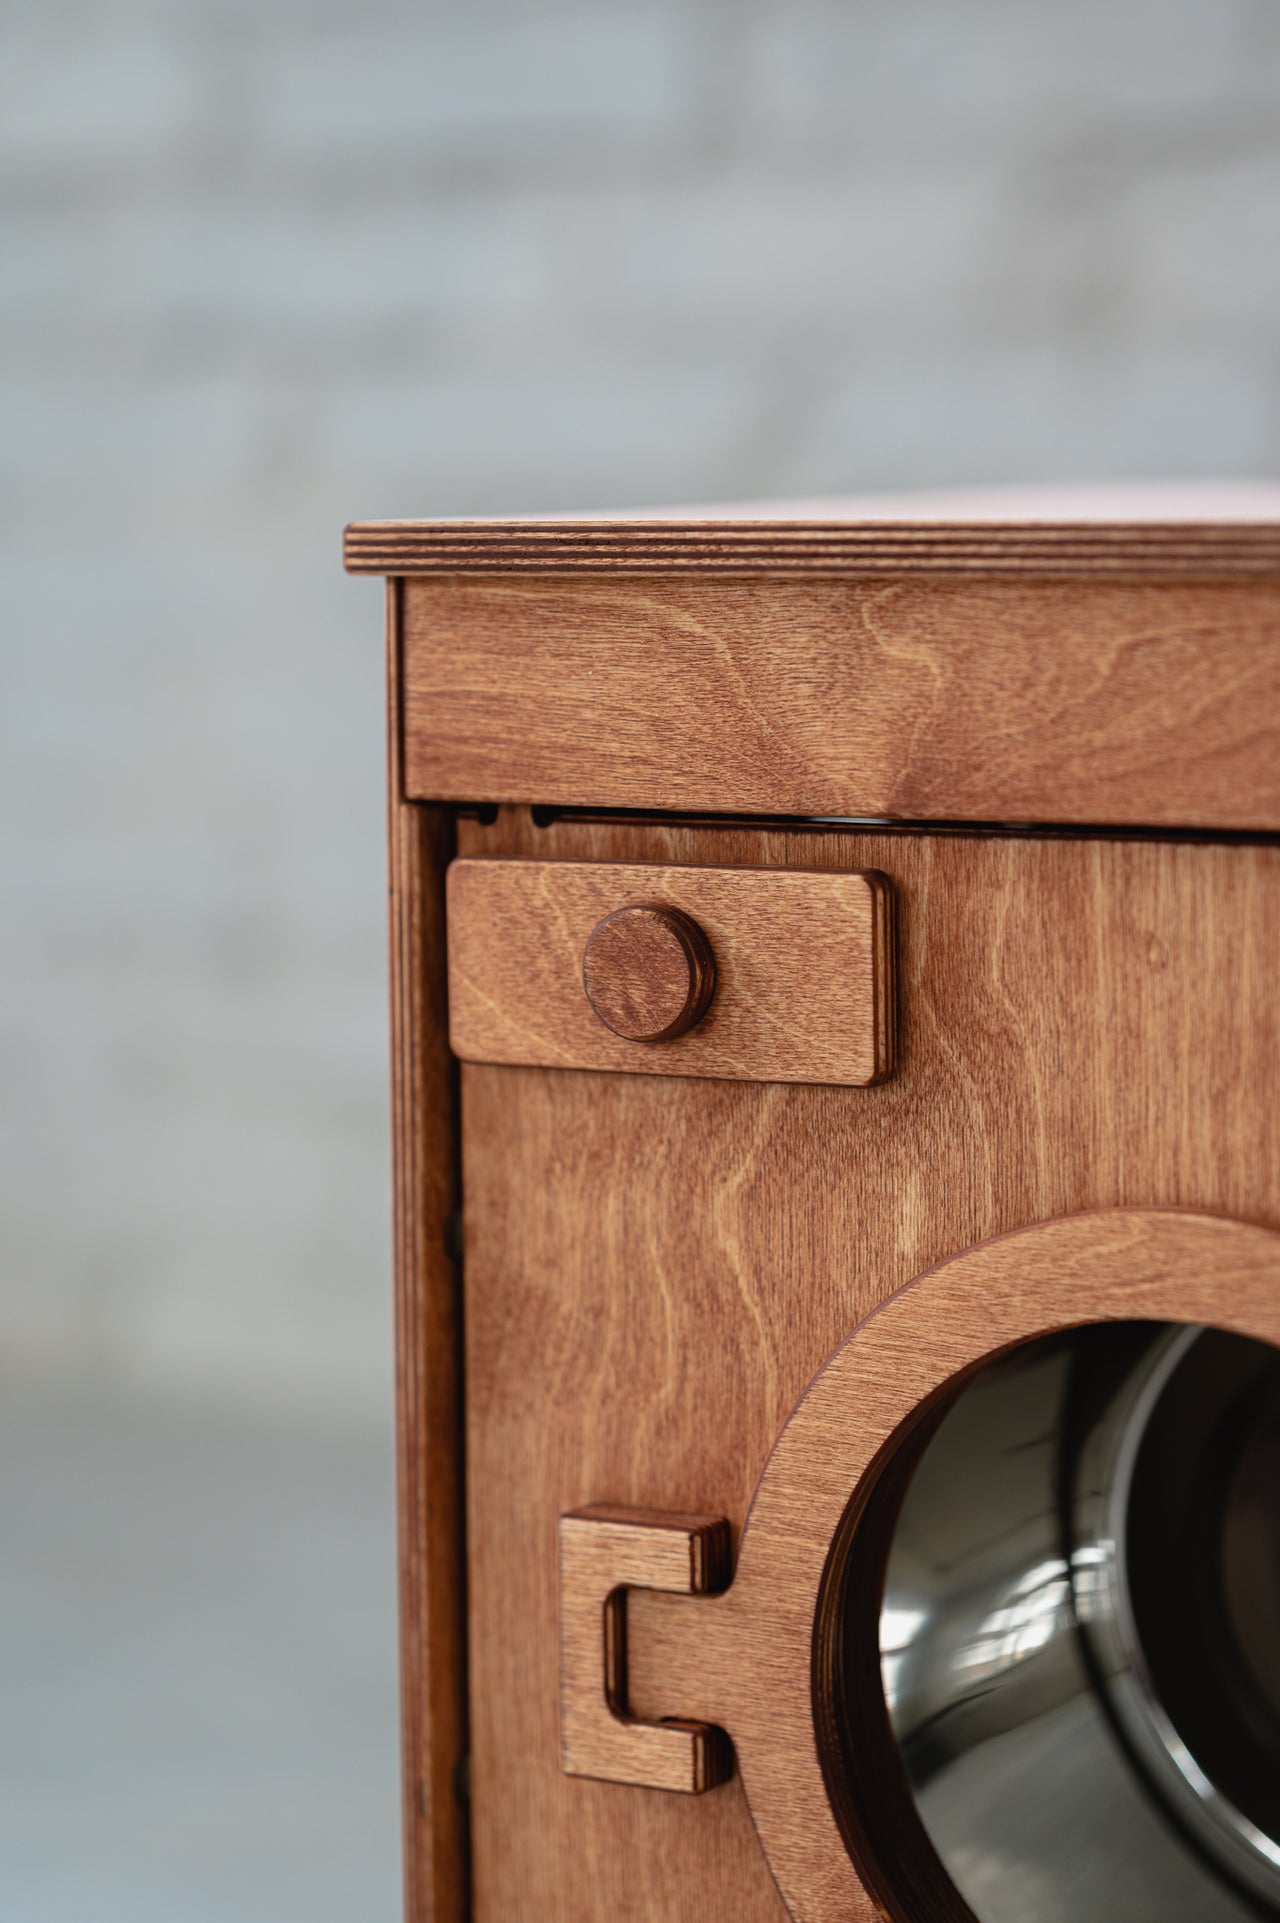 Wooden Washing Machine - Mahogany - MIDMINI - Handcrafted wooden toys for generations.